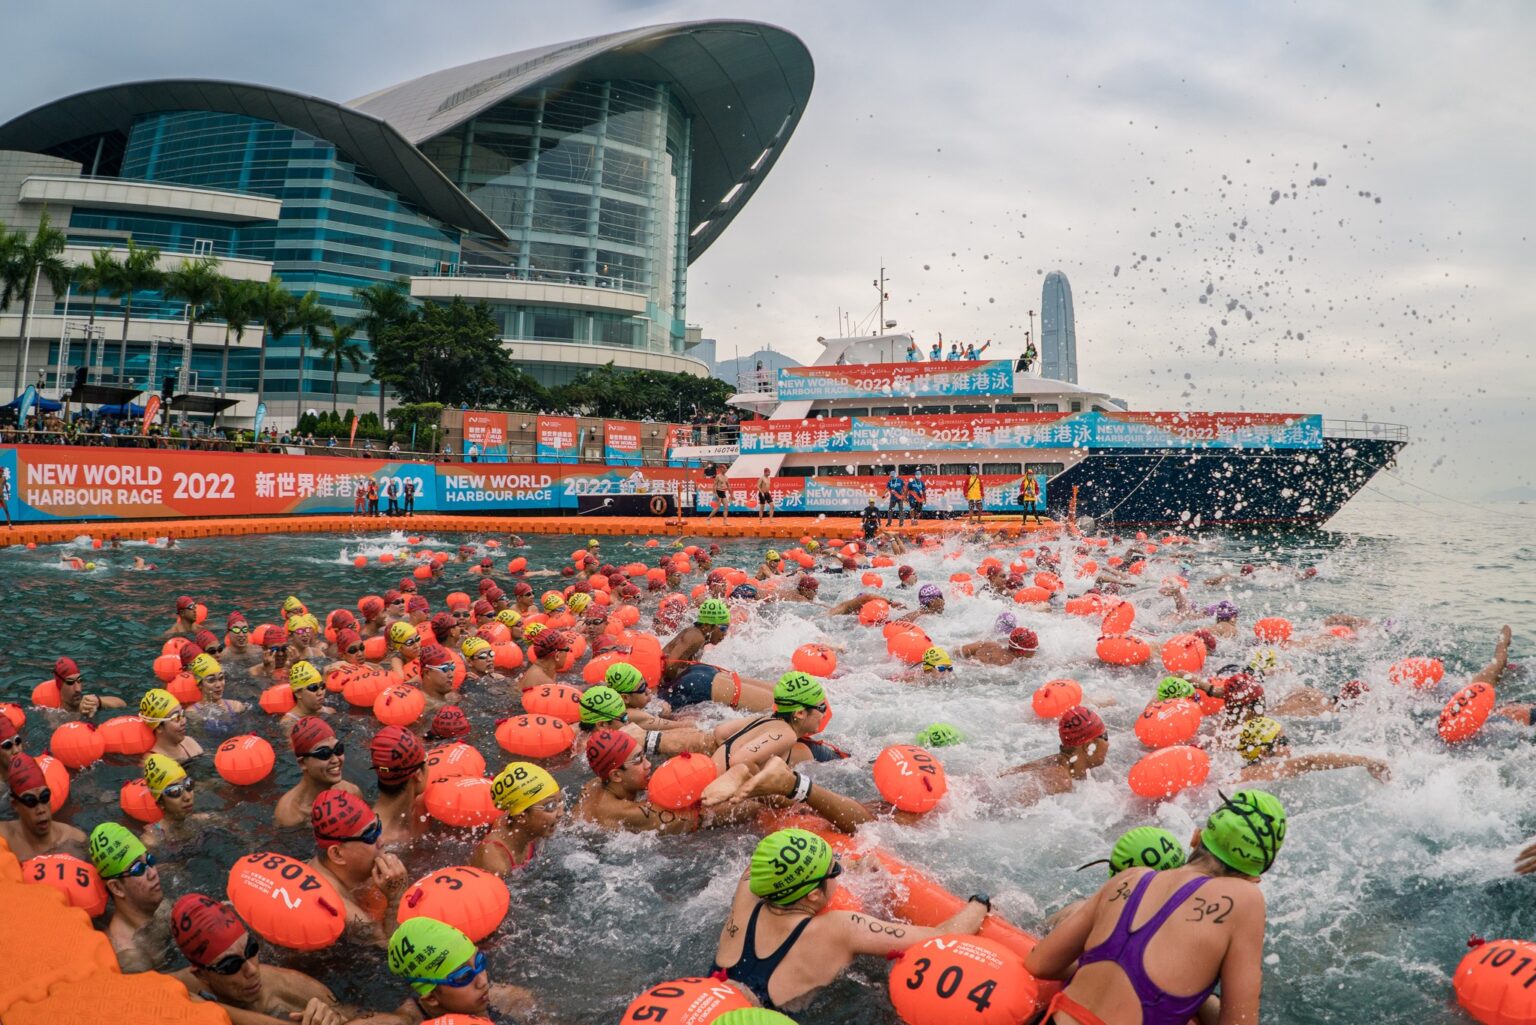 Swimmers at the beginning of the New World Harbour Race in Hong Kong. They all wear orange or green swim caps and are swimming towards the Tsim Sha Tsui finish point across the harbour. The Hong Kong Convention and Exhibition Centre is in the background.